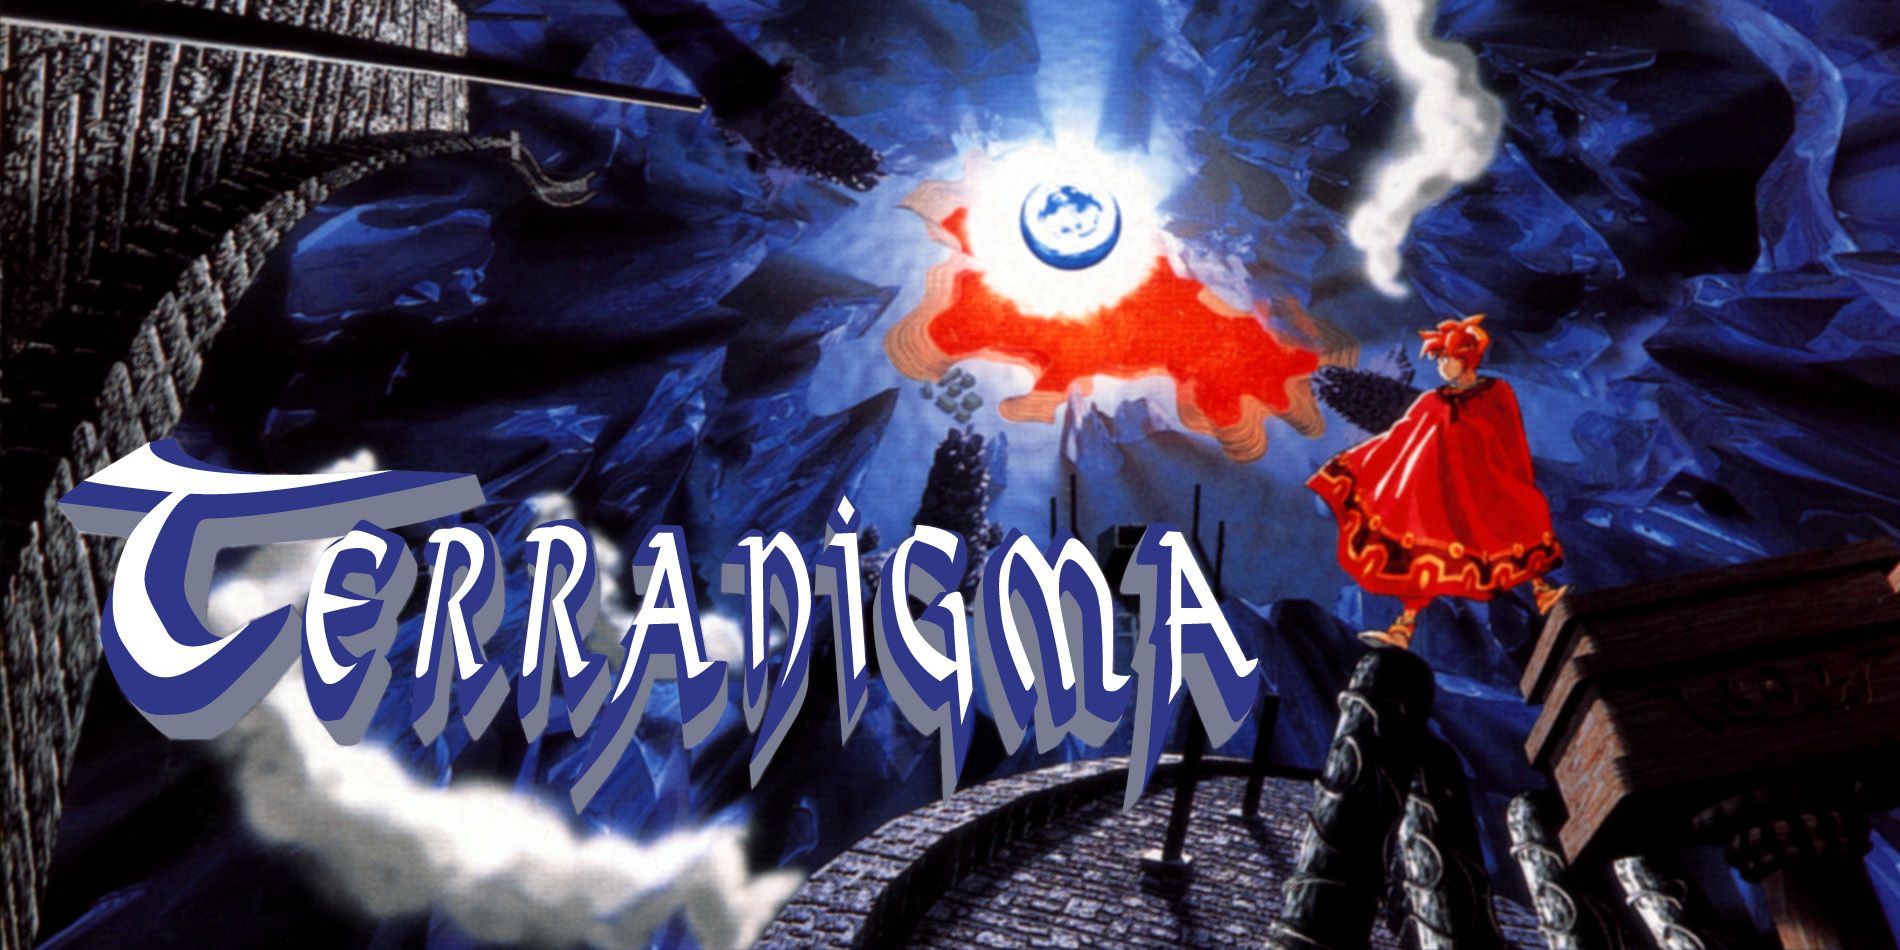 The art for Terranigma on SNES shows the protagonist looking at the moon.